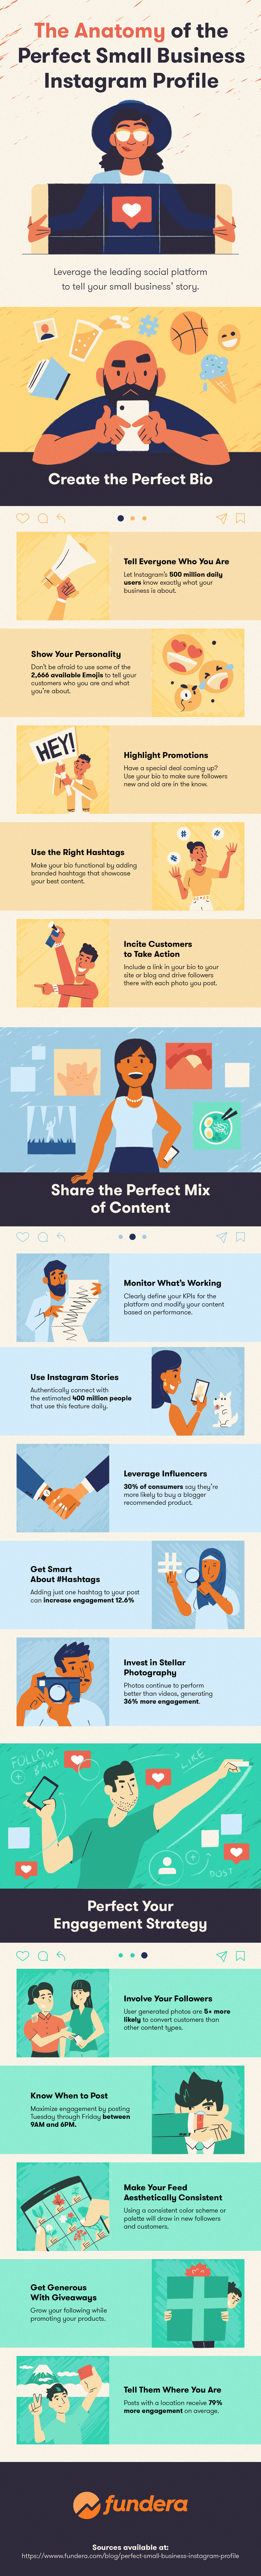 Anatomy of a Business Instagram Profile